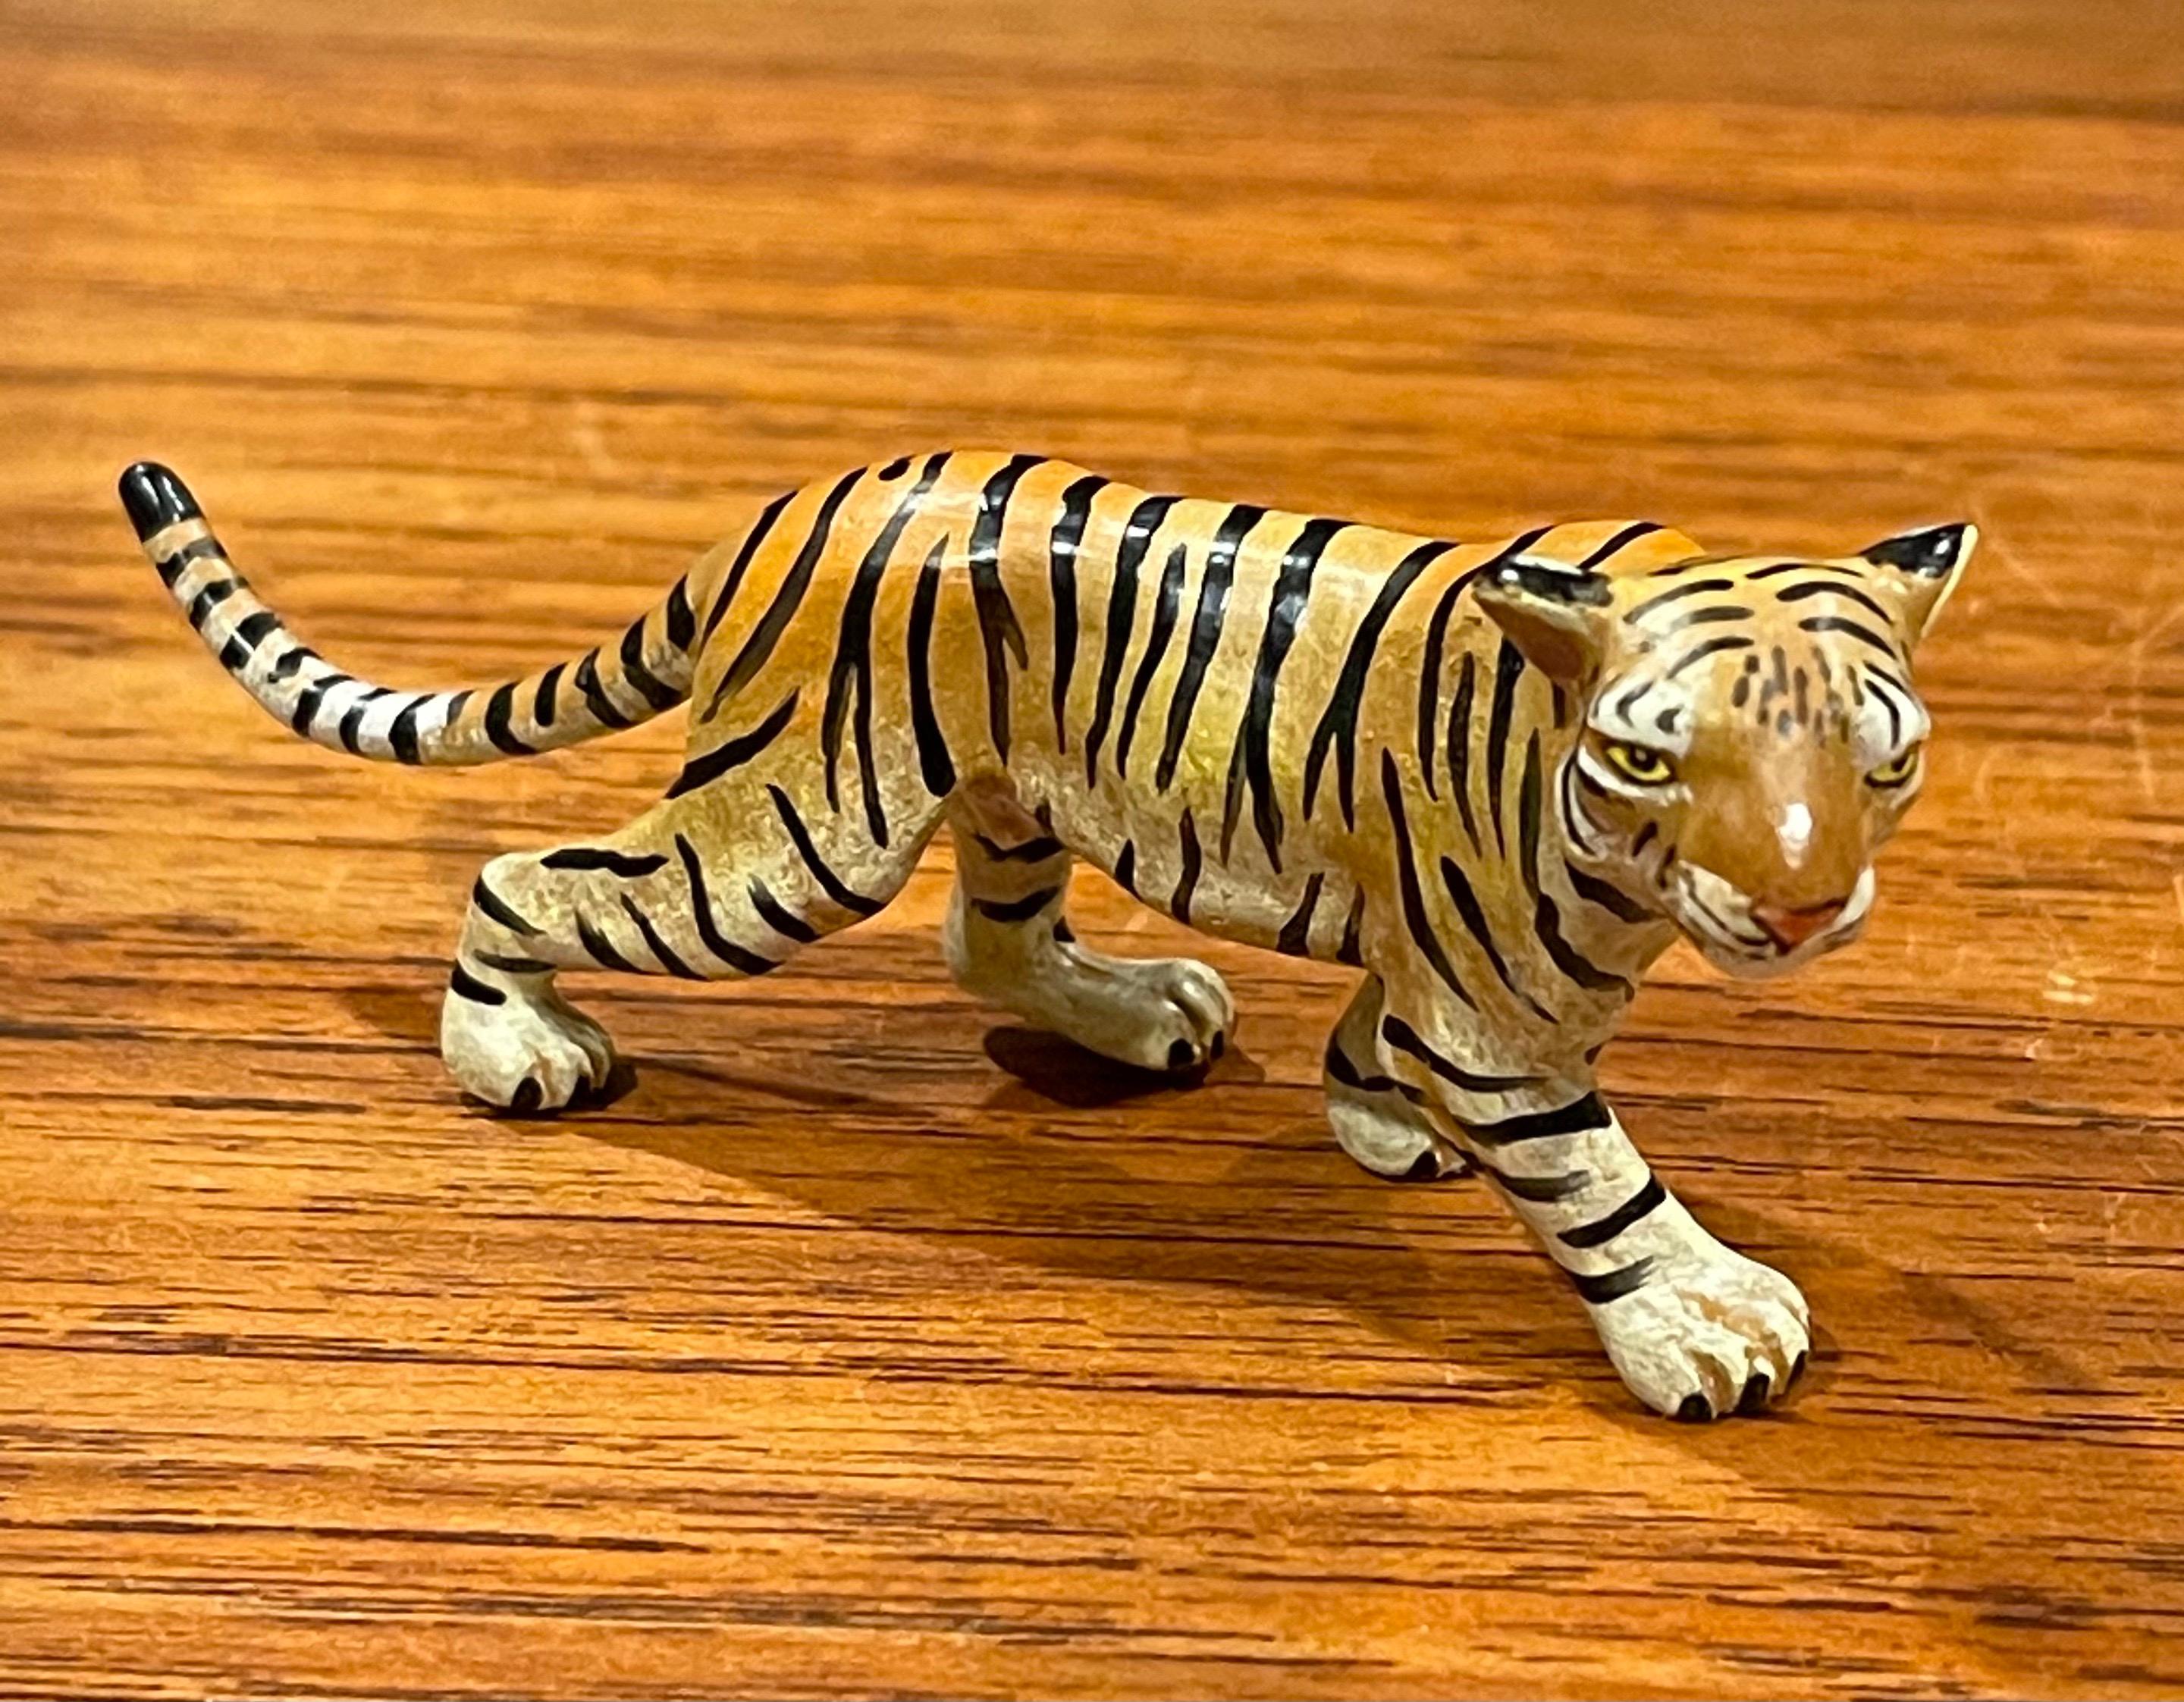 Austrian bronze hand painted miniature tiger sculpture, circa 2000s. This piece has amazing detail and weight and is in excellent condition. The sculptureis individually cast from sand molds that are used only once, then sculpted and hand painted